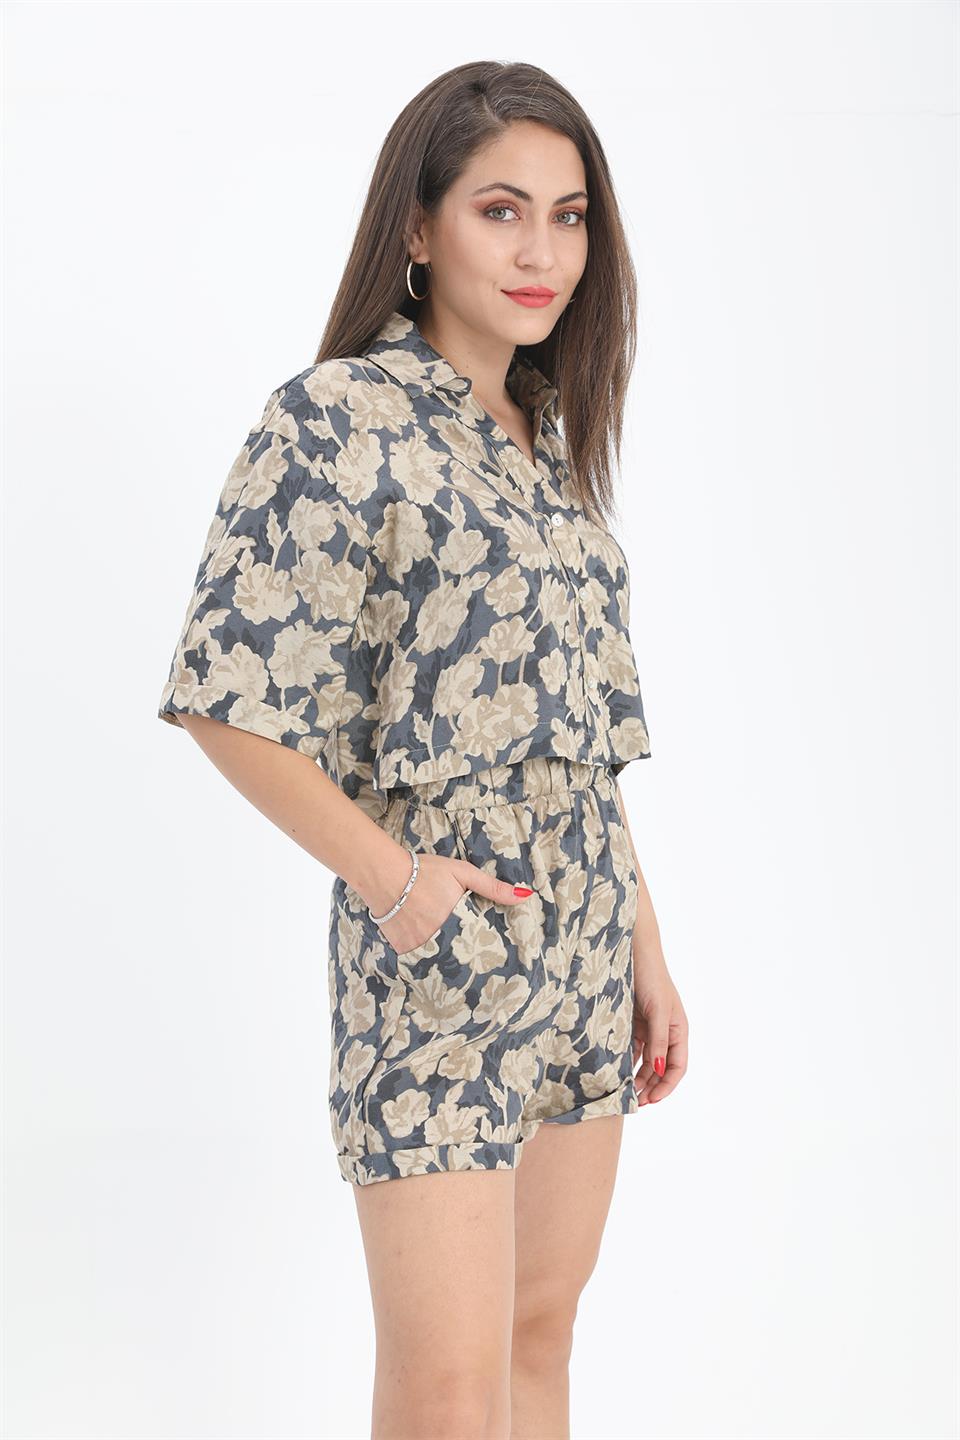 Women's Shirt with Double Layer Printed Sleeve - Navy Blue - STREETMODE™